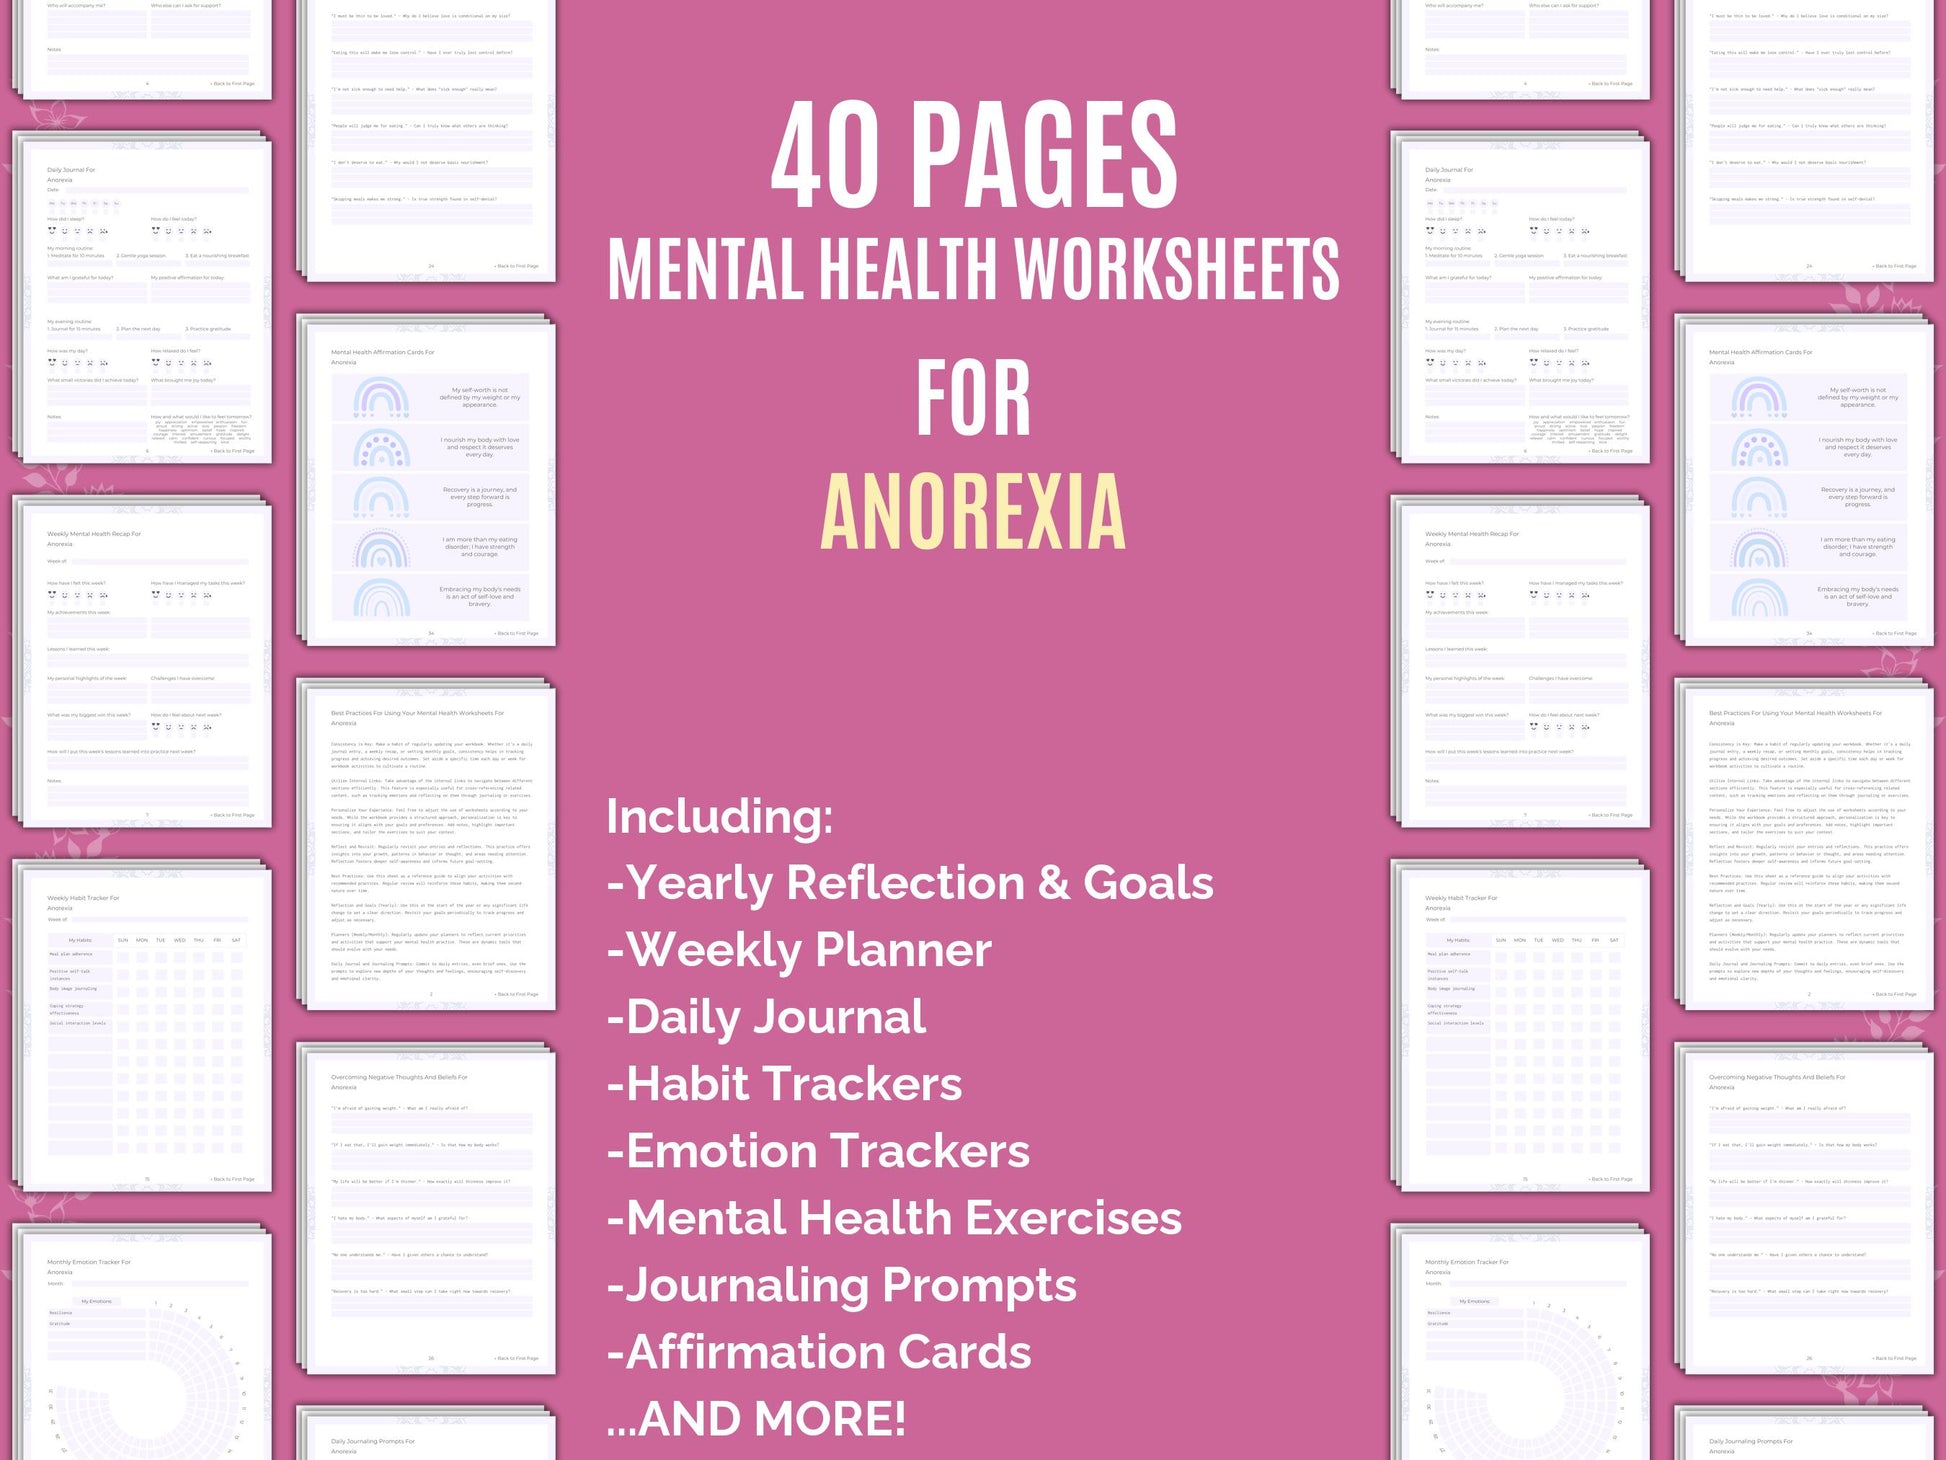 Anorexia Cheat Sheet, Anorexia Journals, Anorexia Tools, Anorexia Notes, Anorexia Journaling, Anorexia Planners, Anorexia Mental Health, Anorexia Templates, Anorexia Therapy, Goal Setting, Anorexia Workbooks, Anorexia Resources, Anorexia Counseling